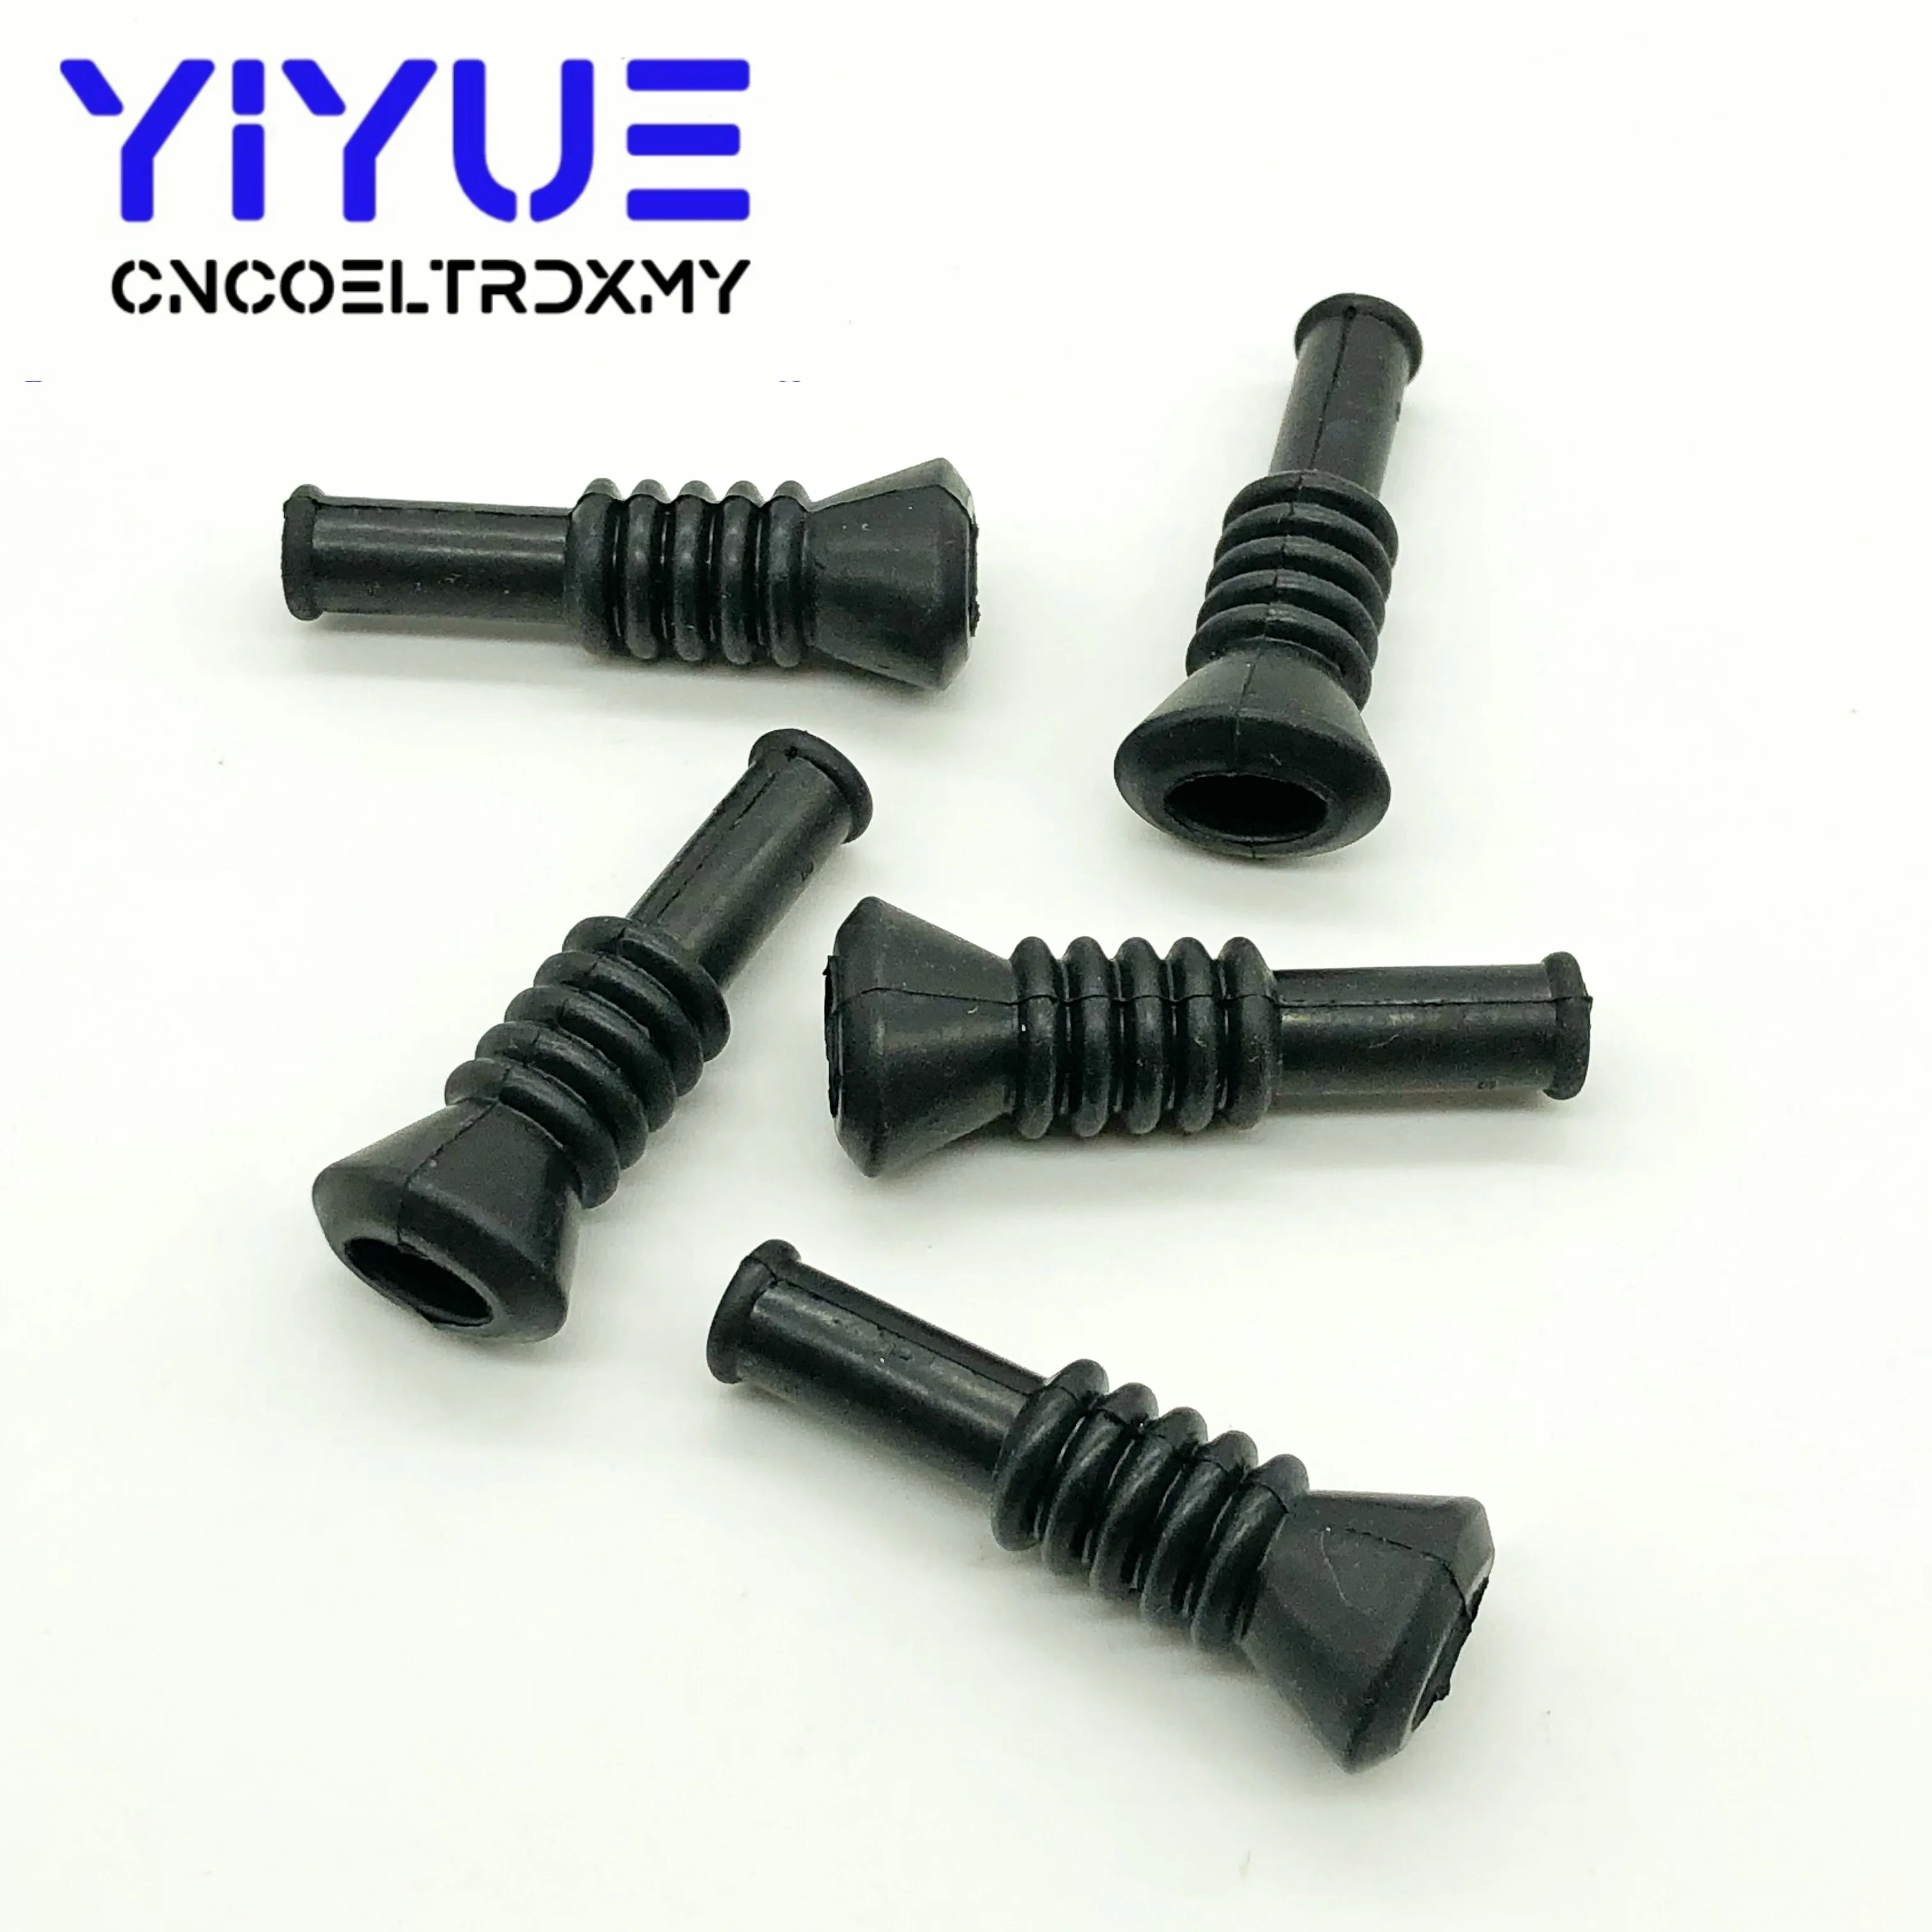 5pcs 2pin Waterproof Electrical Wire Connector Plug sheath silica gel sheath injection nozzle EV1 fuel injector connectors 